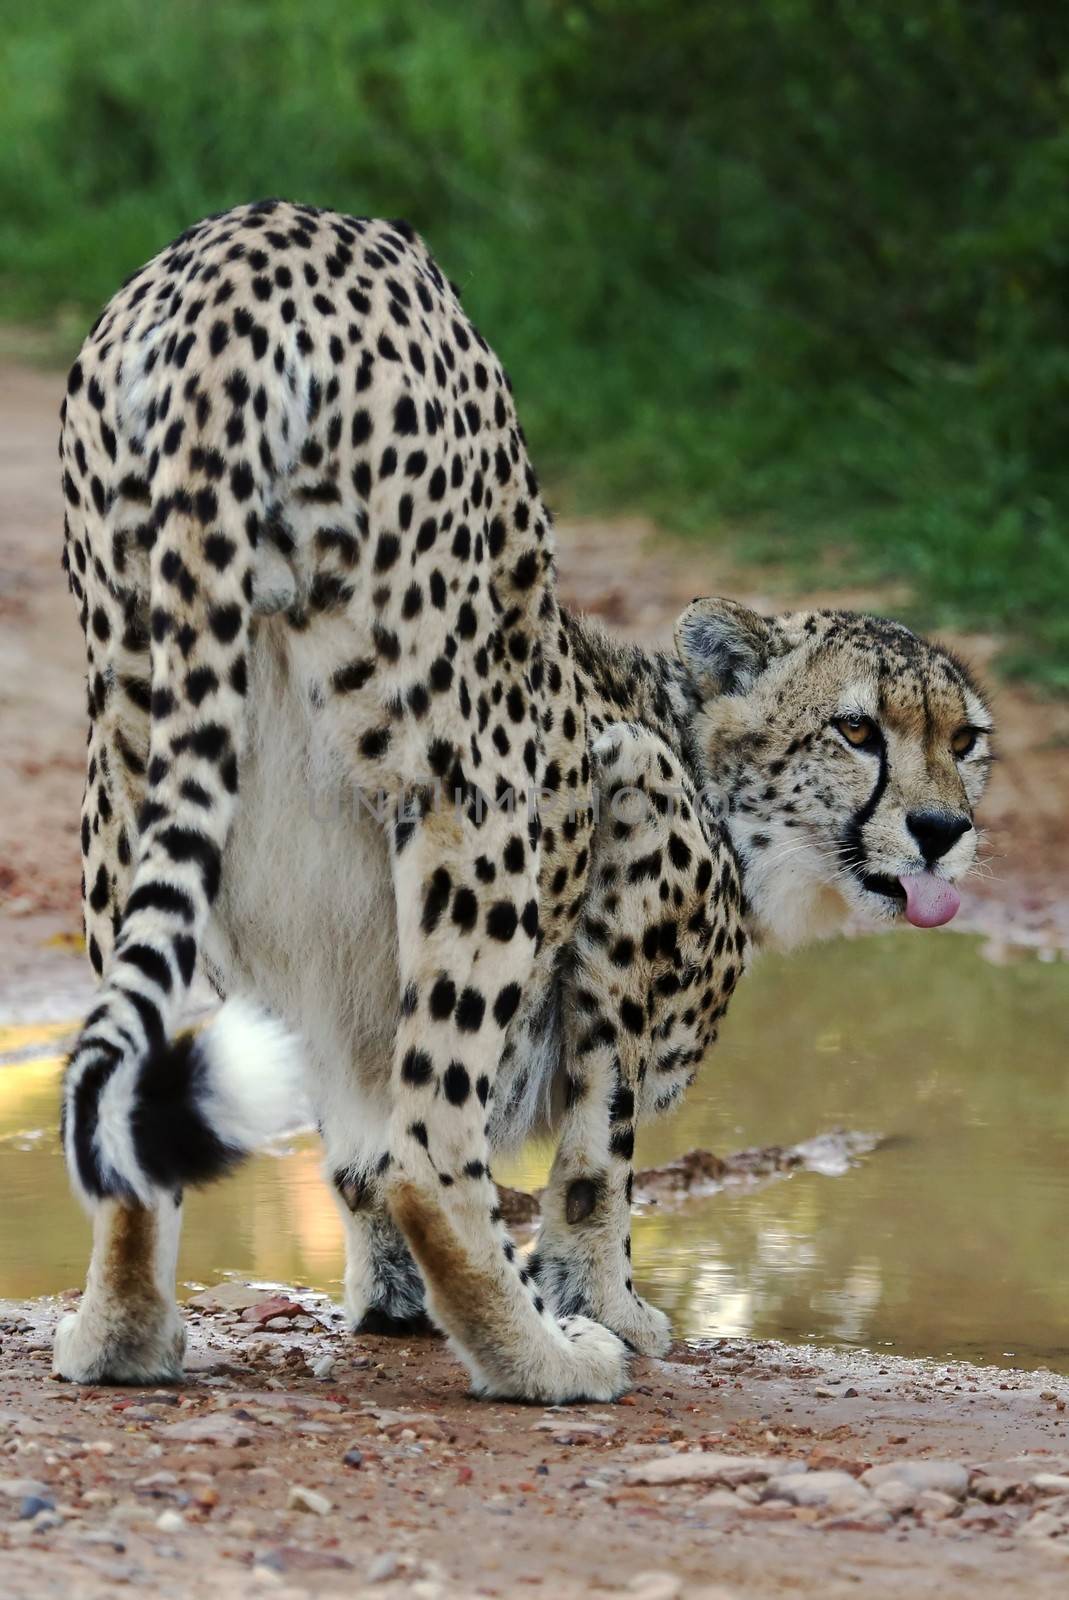 Cheetah wild cat with tongue sticking out and drinking water